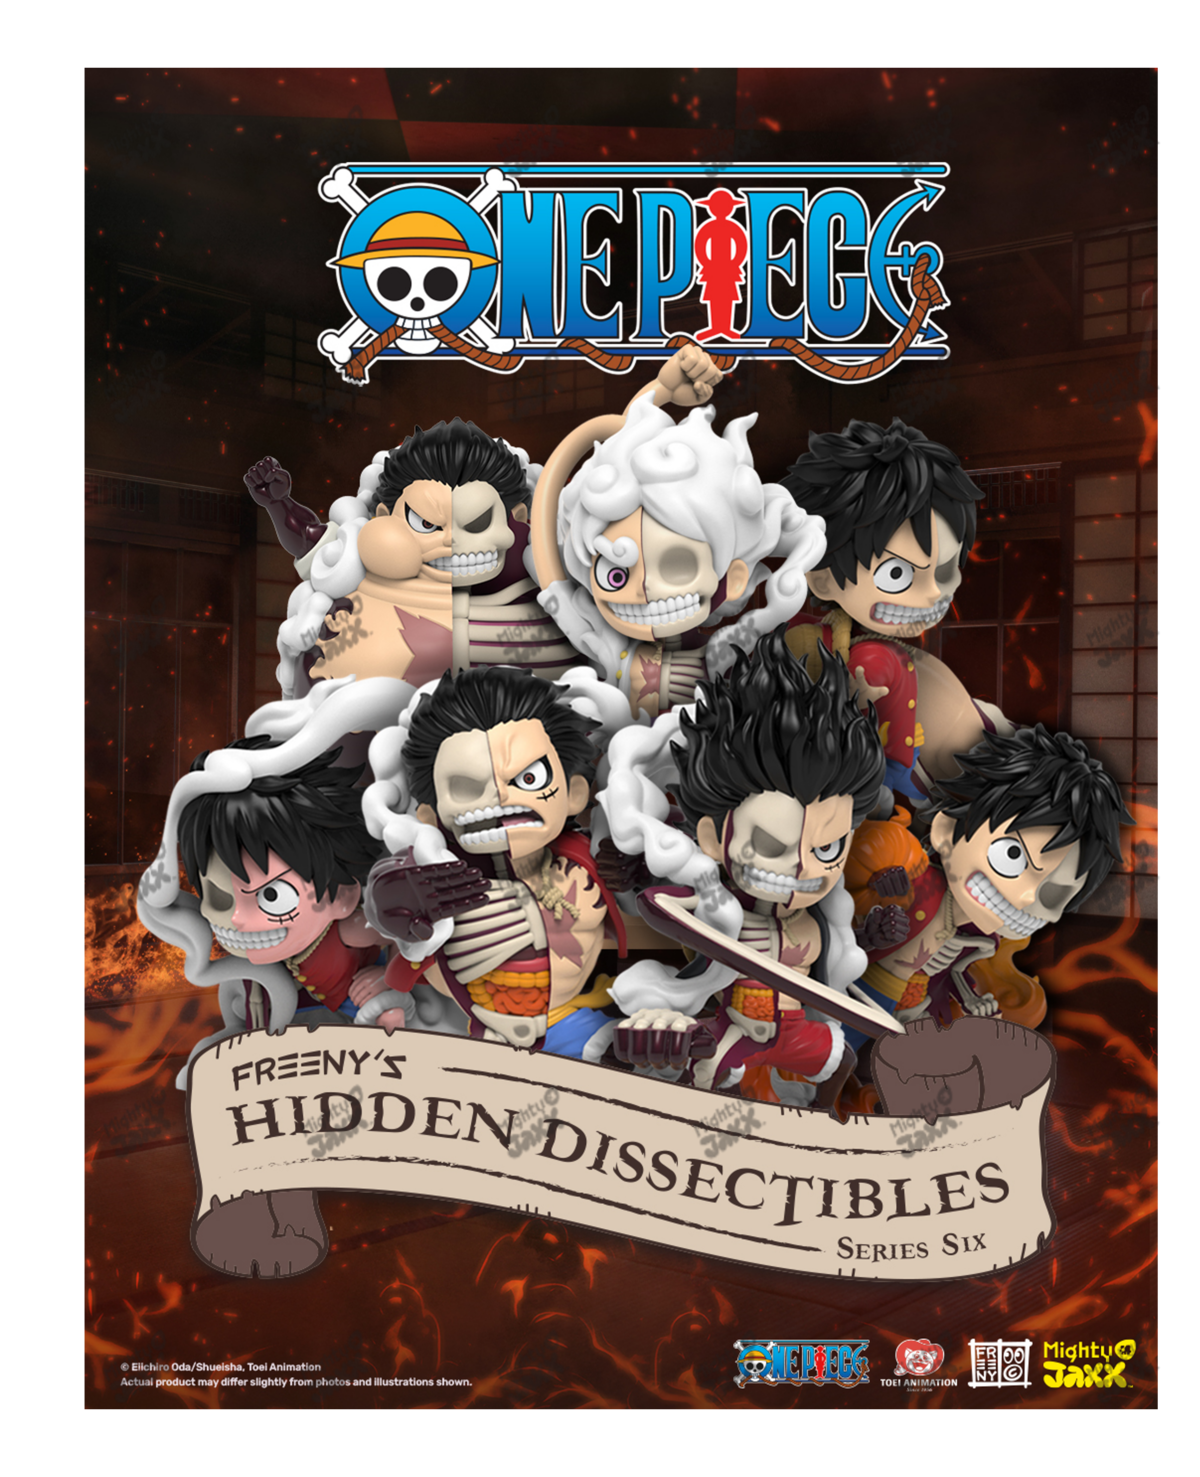 [Pre-order] One Piece - Freeny's Hidden Dissection One Piece Luffy’s Gears Edition Blind Box Mighty Jaxx